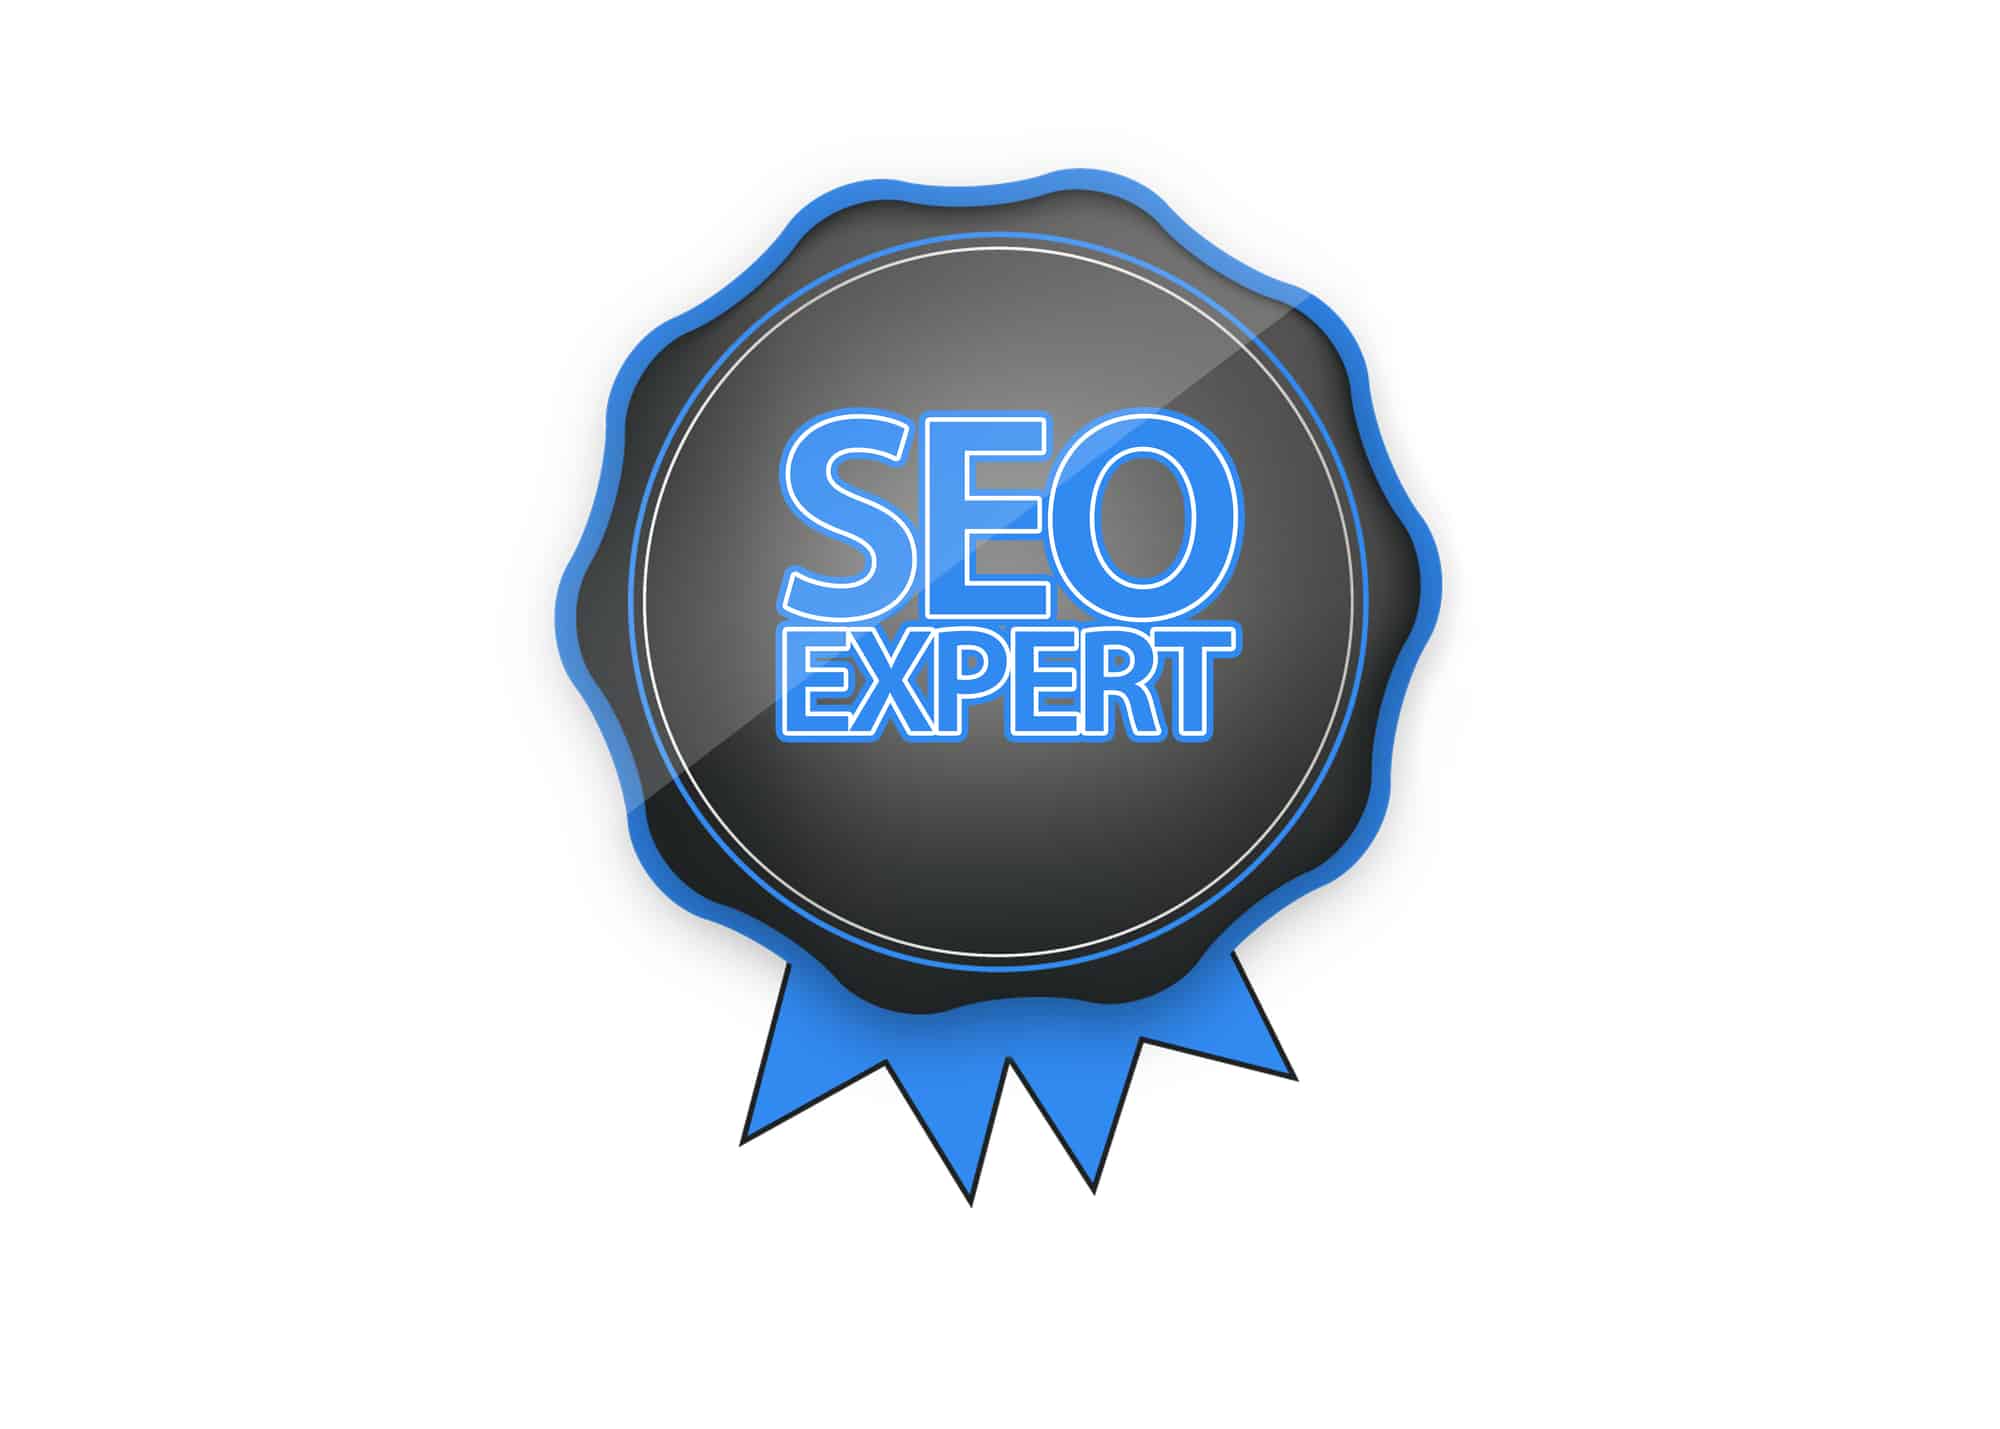 Appropriate Experience of the SEO expert